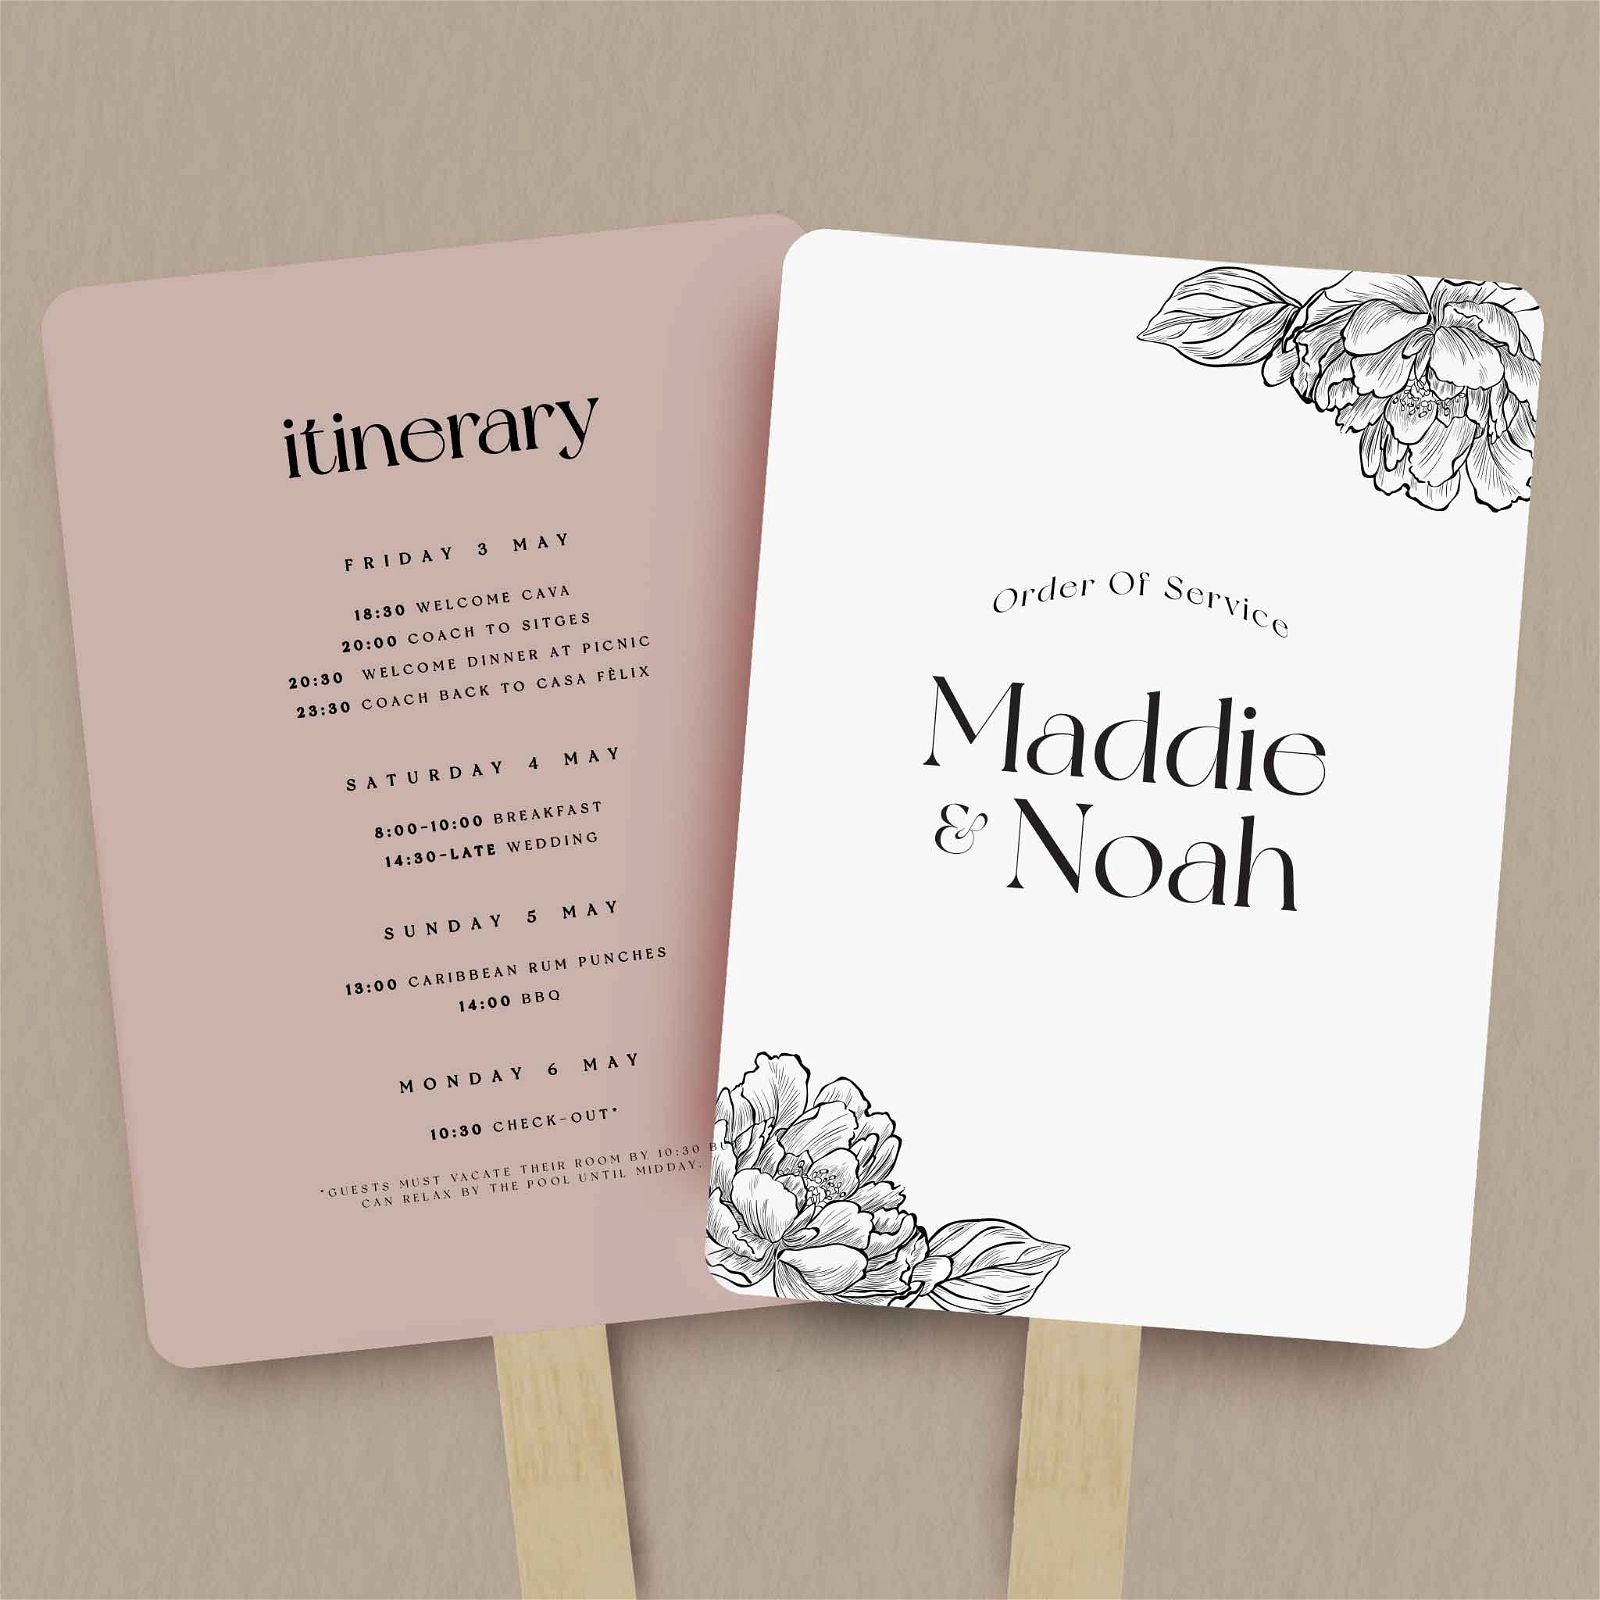 Maddie Order Of Service  Ivy and Gold Wedding Stationery   